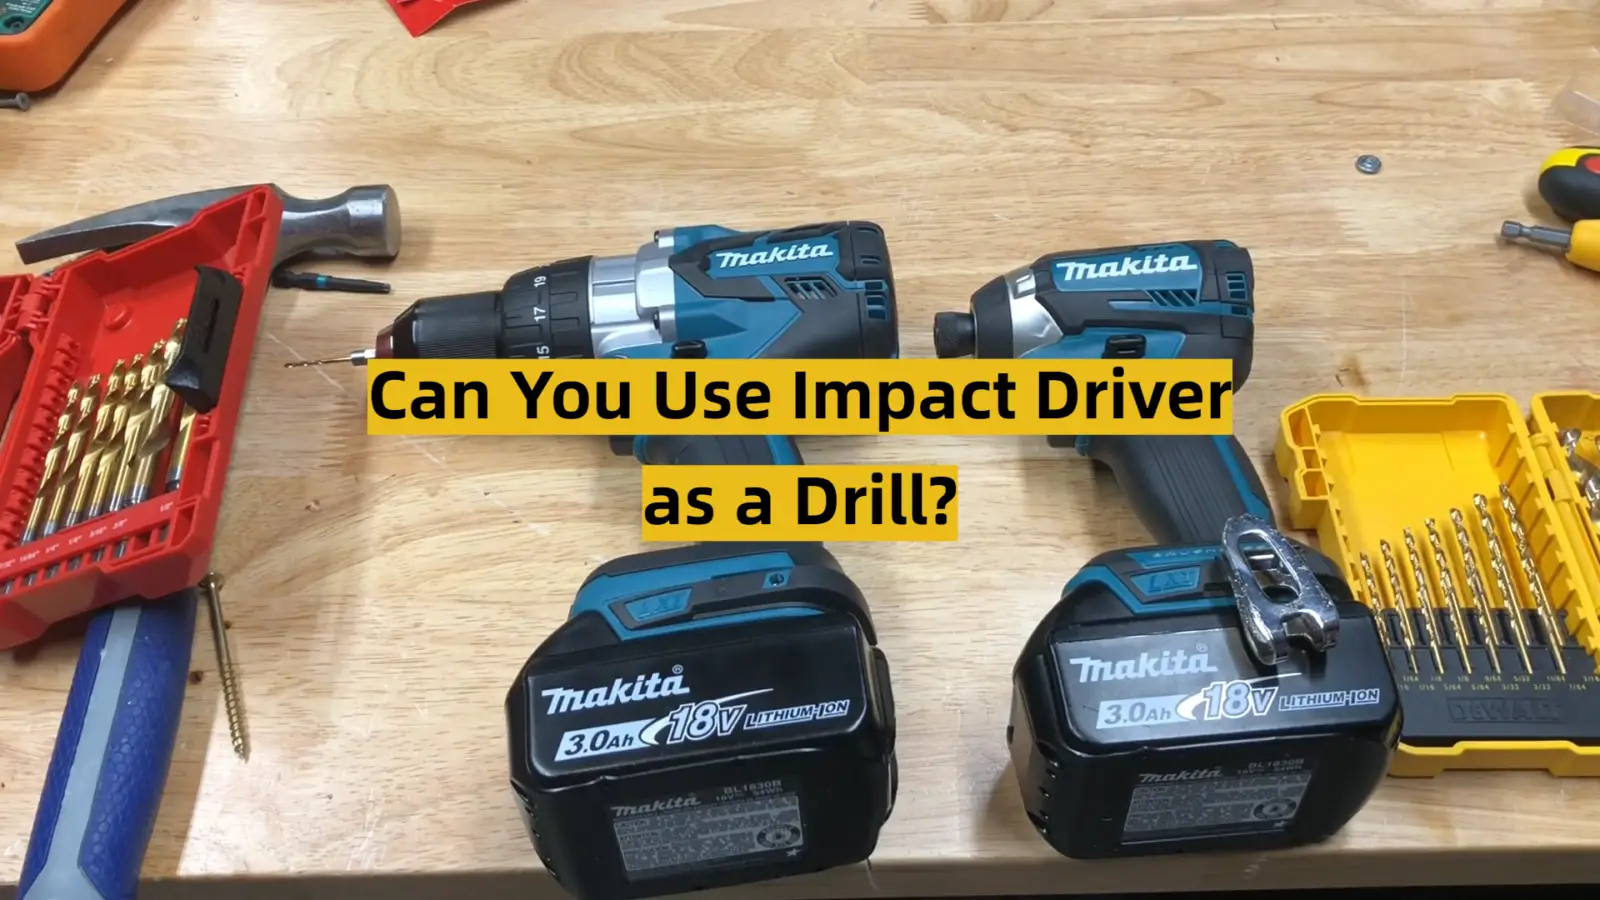 Can You Use Impact Driver as a Drill?